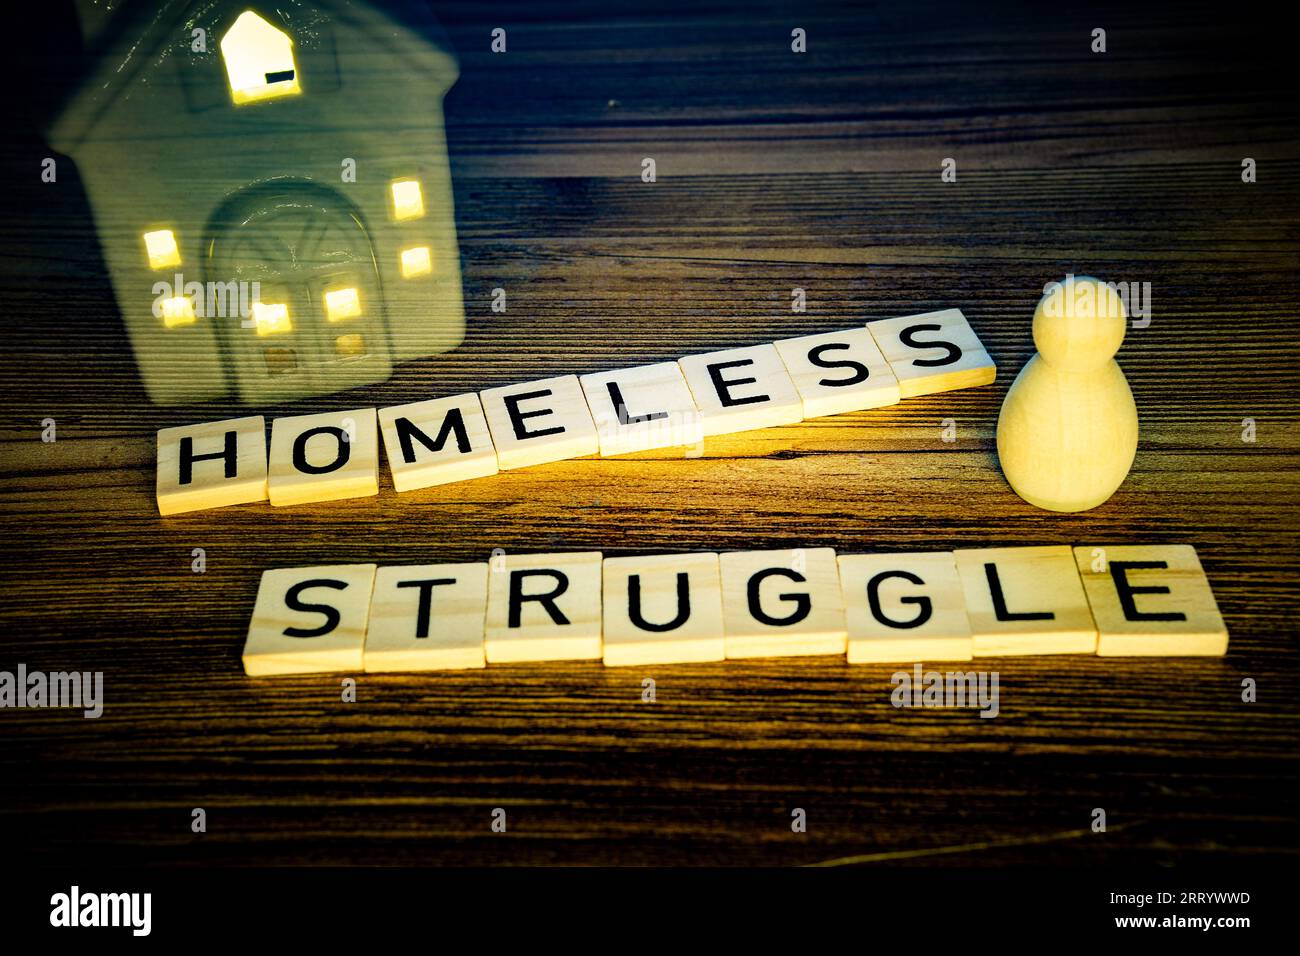 homeless struggle in wooden letters on a wood background, a figure with vanishing house Stock Photo